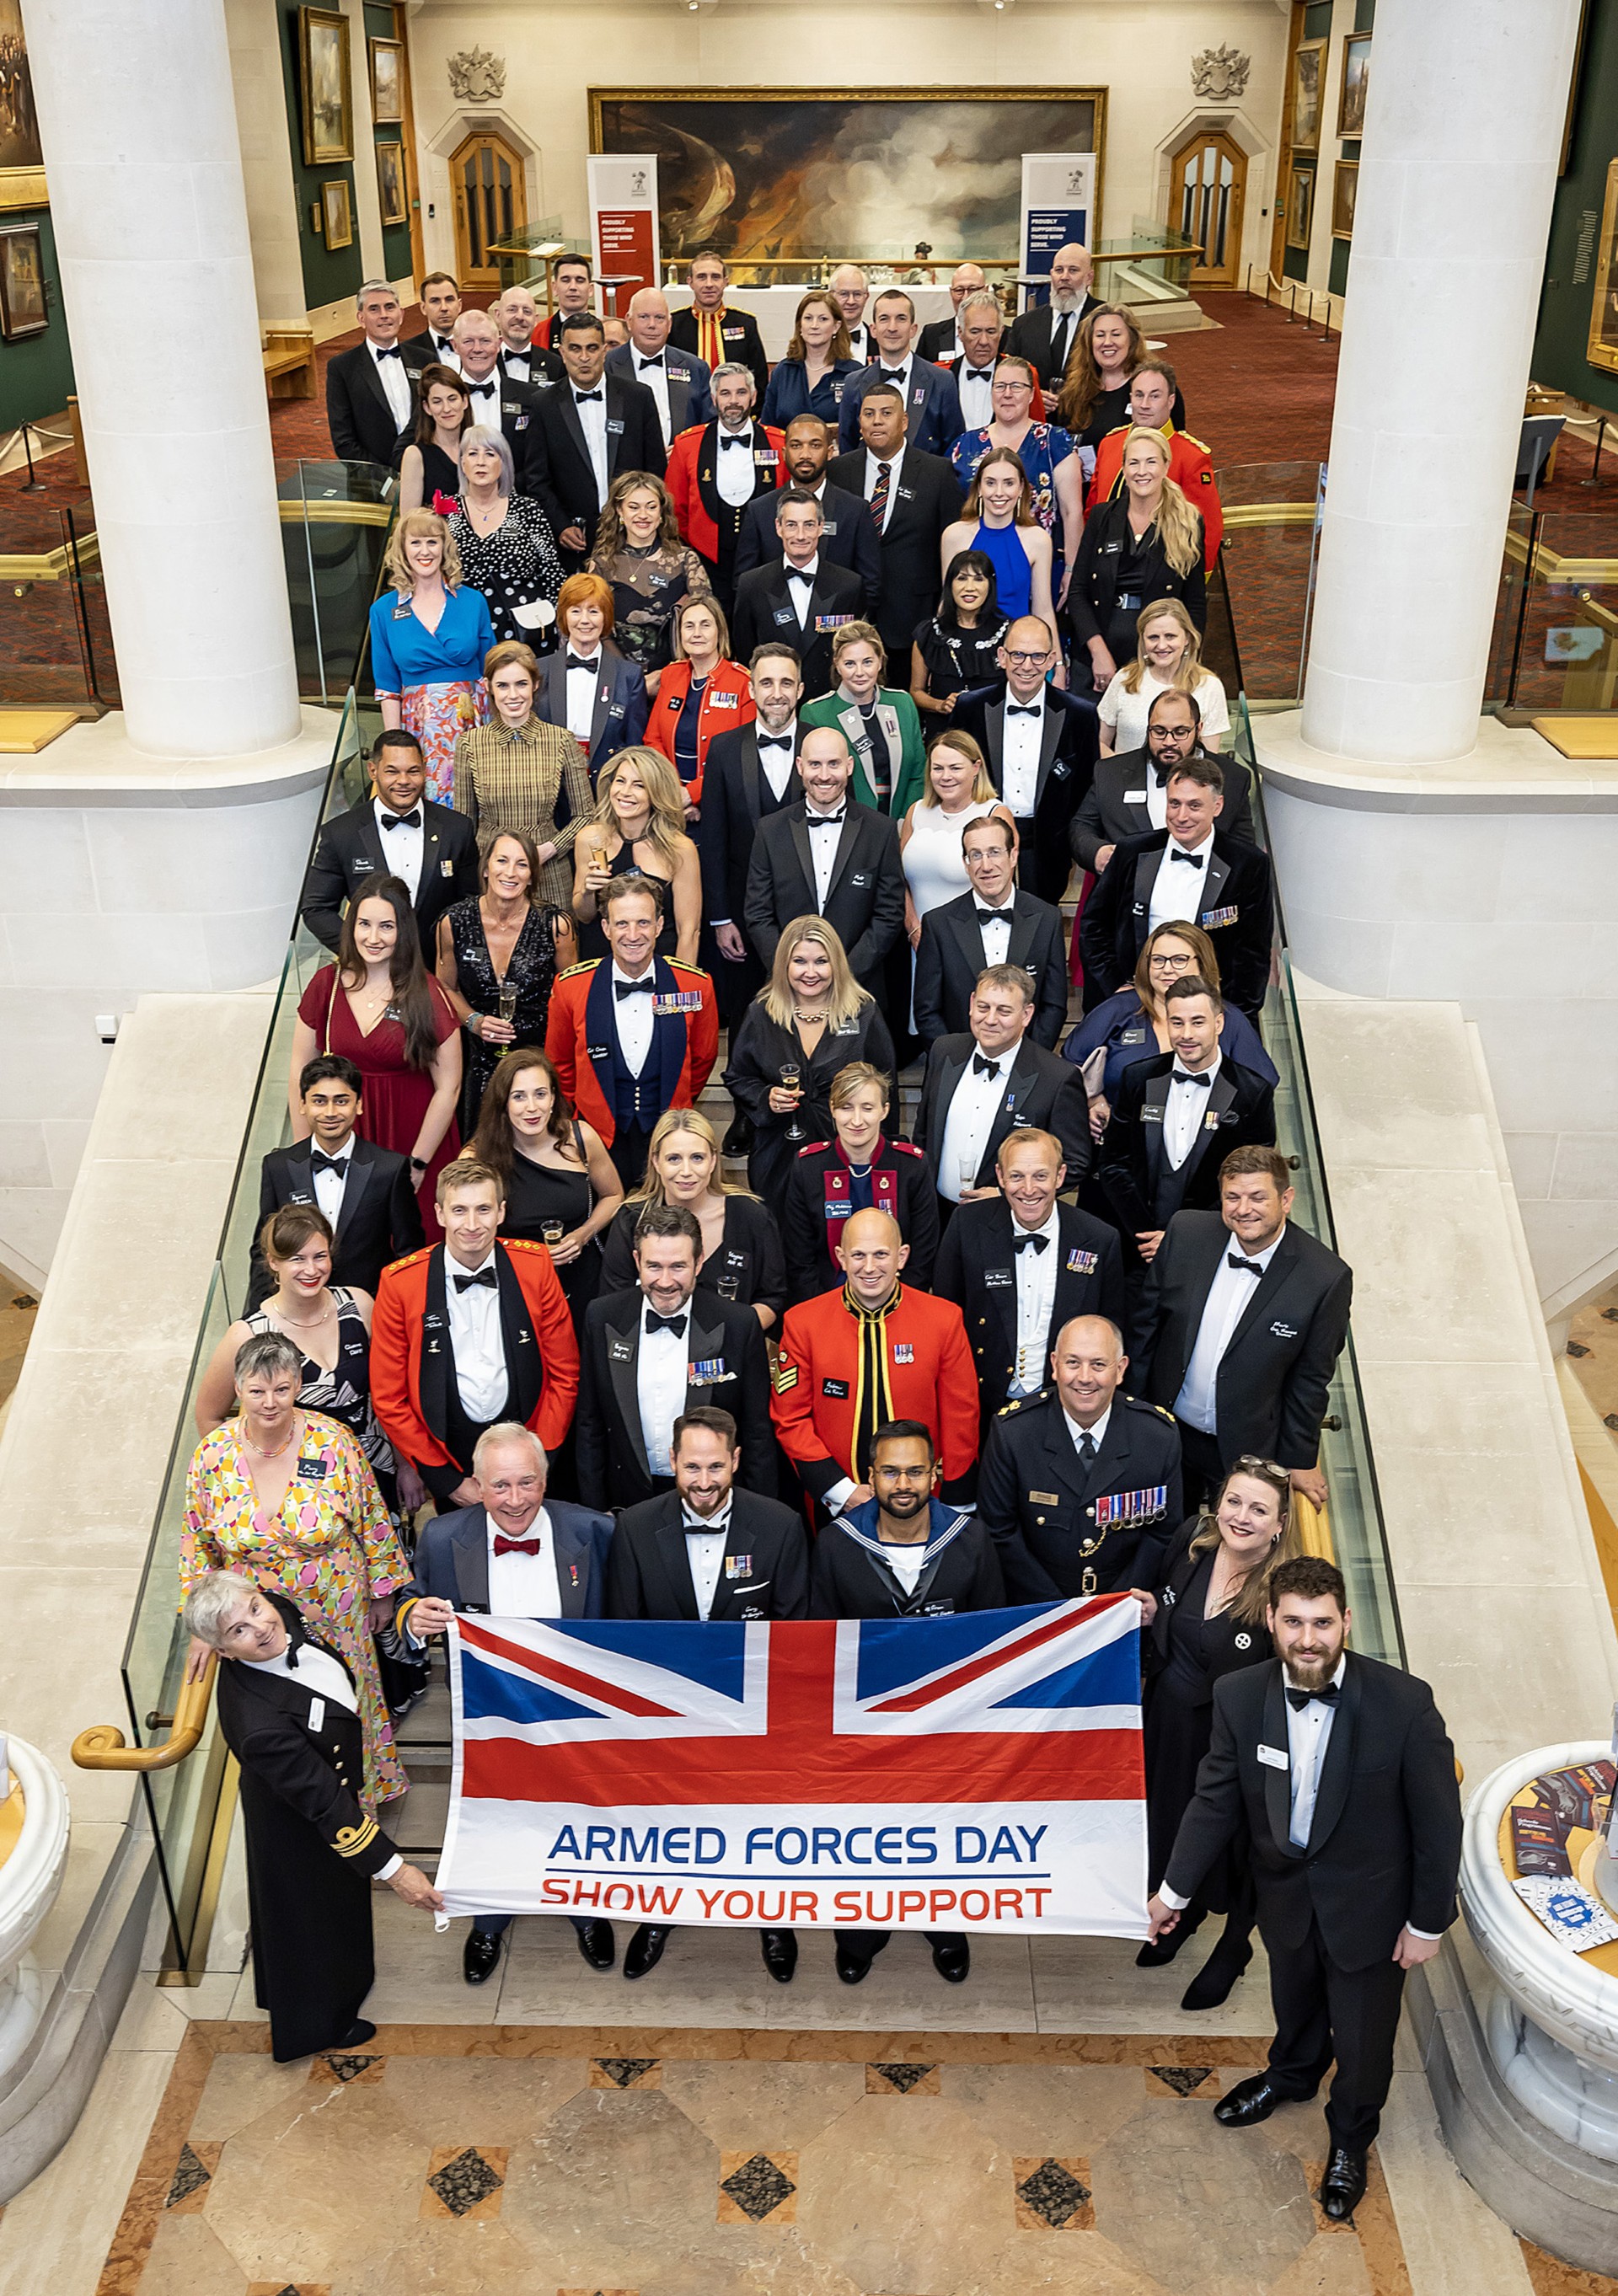 Attendees standing on the stairs of the building, holding an 'ARMED FORCES DAY - SHOW YOUR SUPPORT' flag.